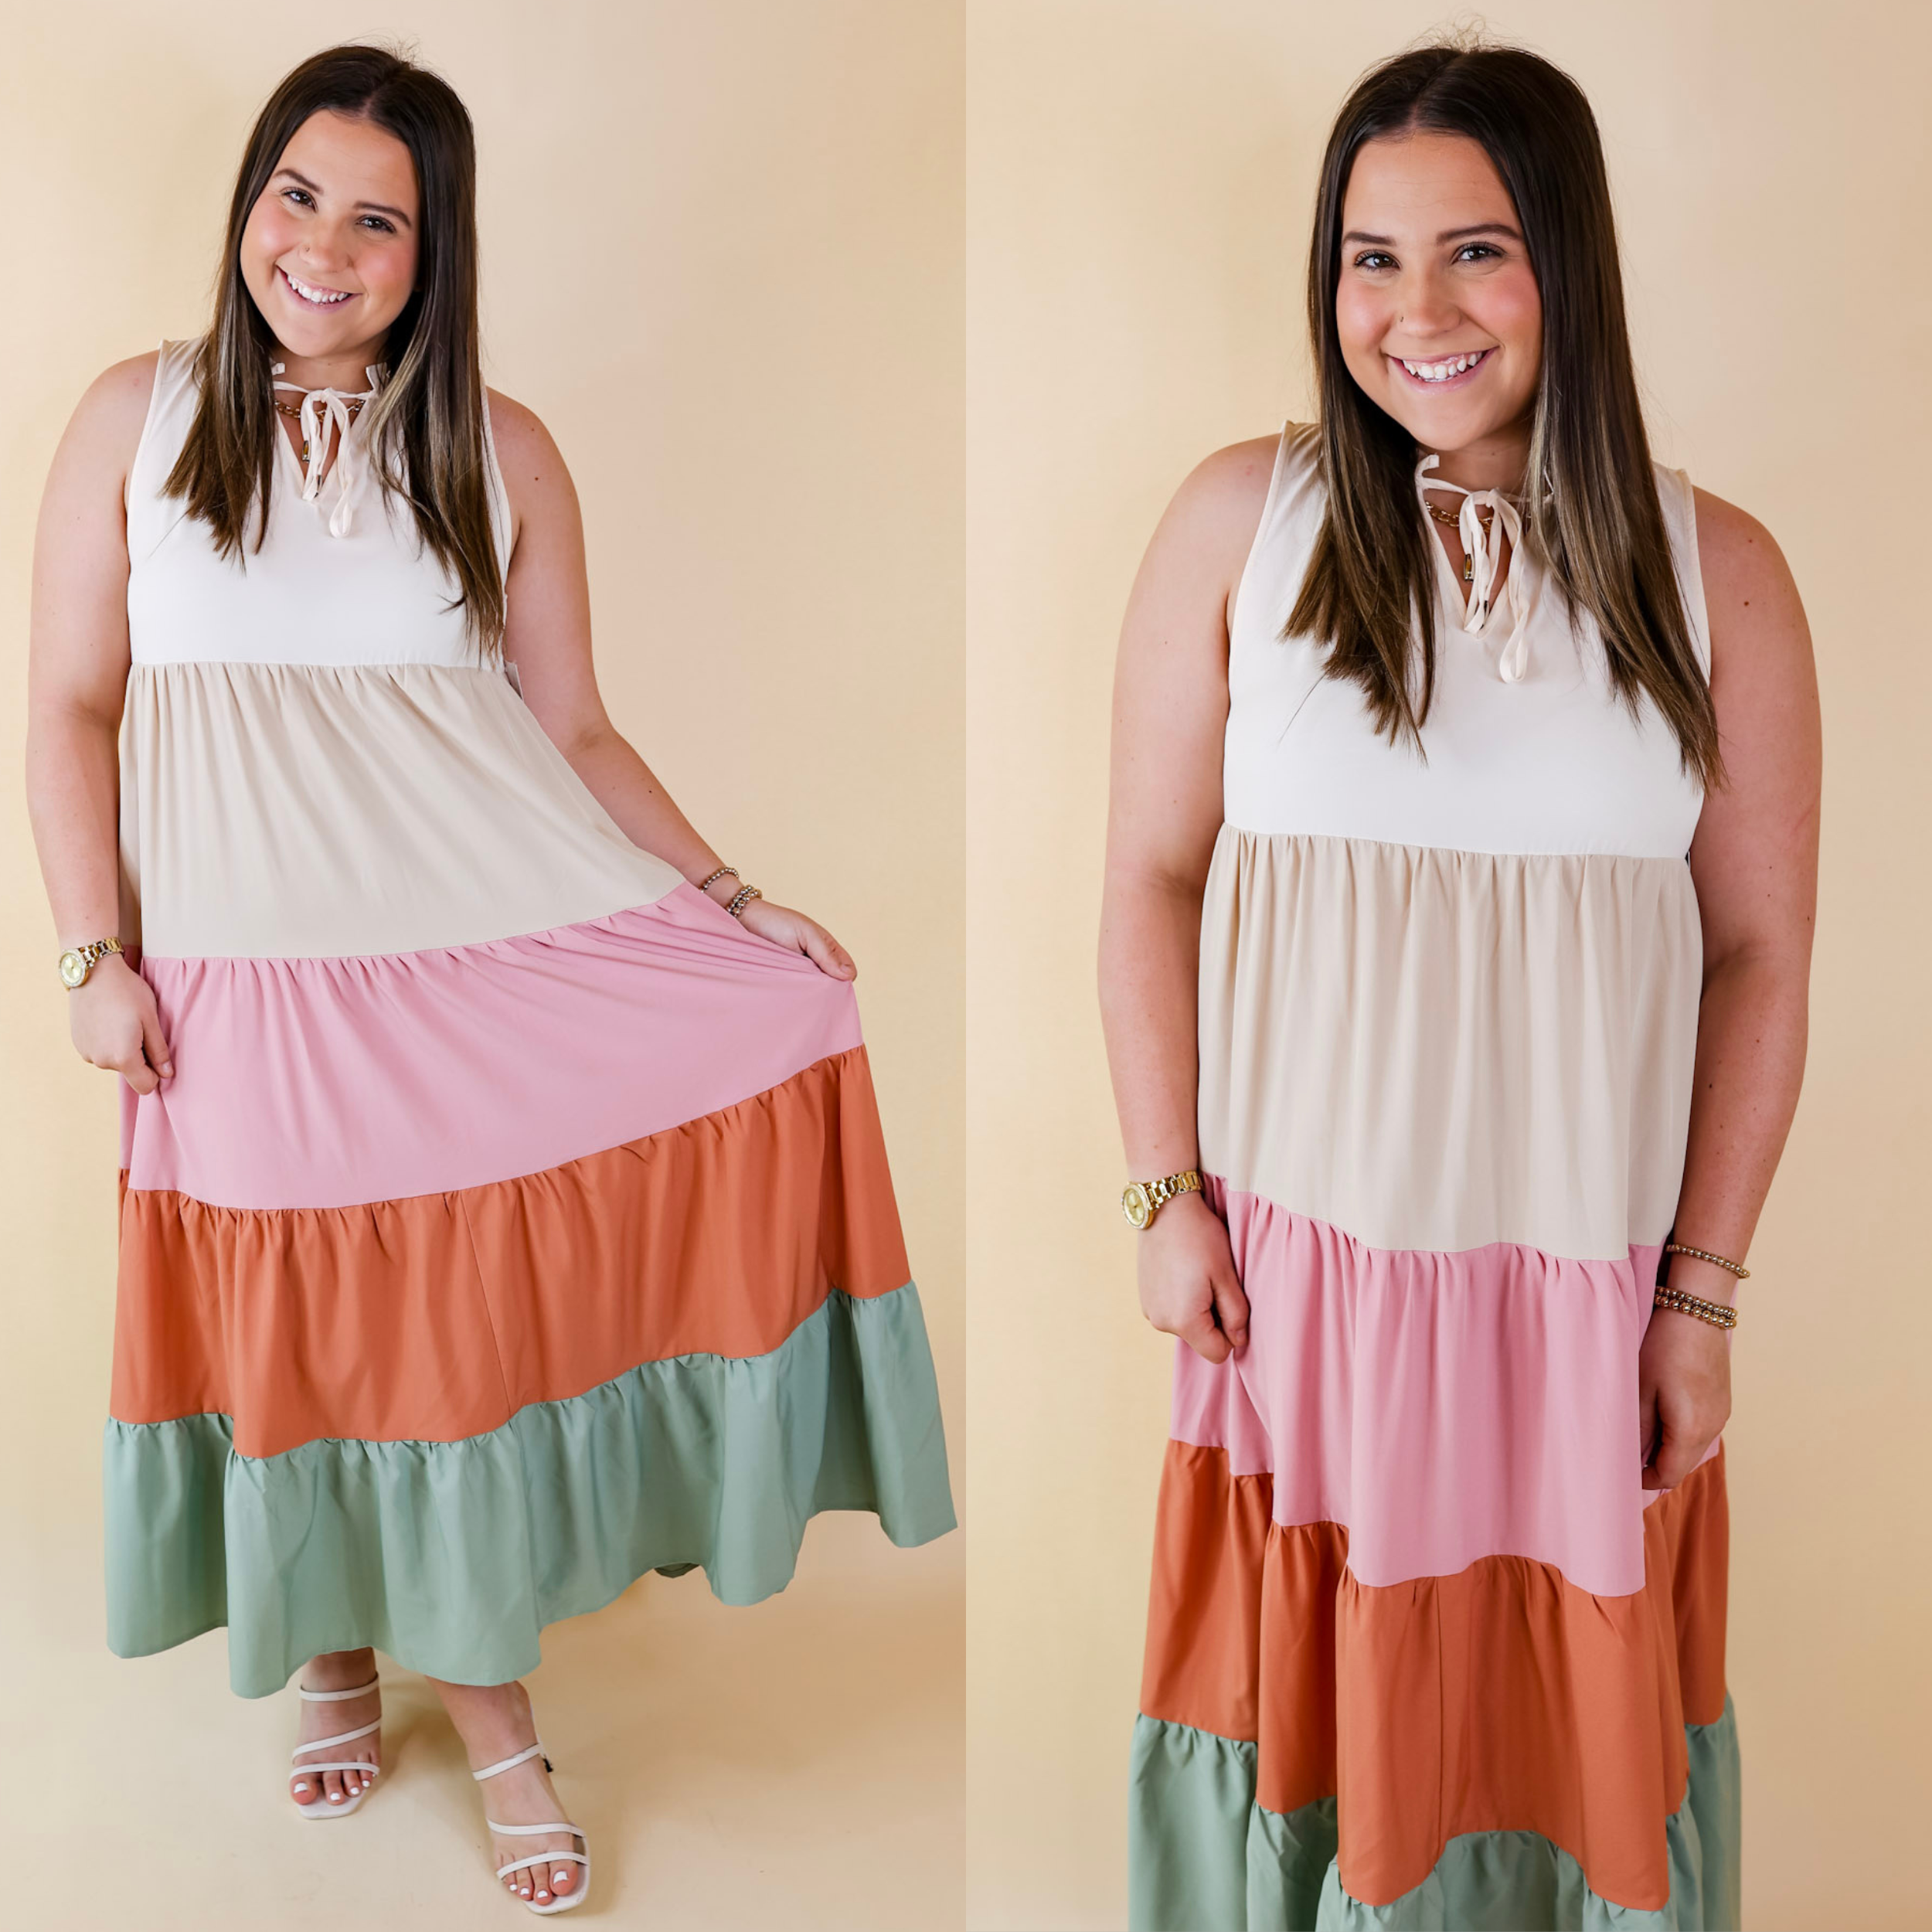 Model is wearing a tank maxi dress with a keyhole front and tiered colors in cream, ivory, light pink, orange, and sage green. Model has it paired with white heels and gold jewelry.